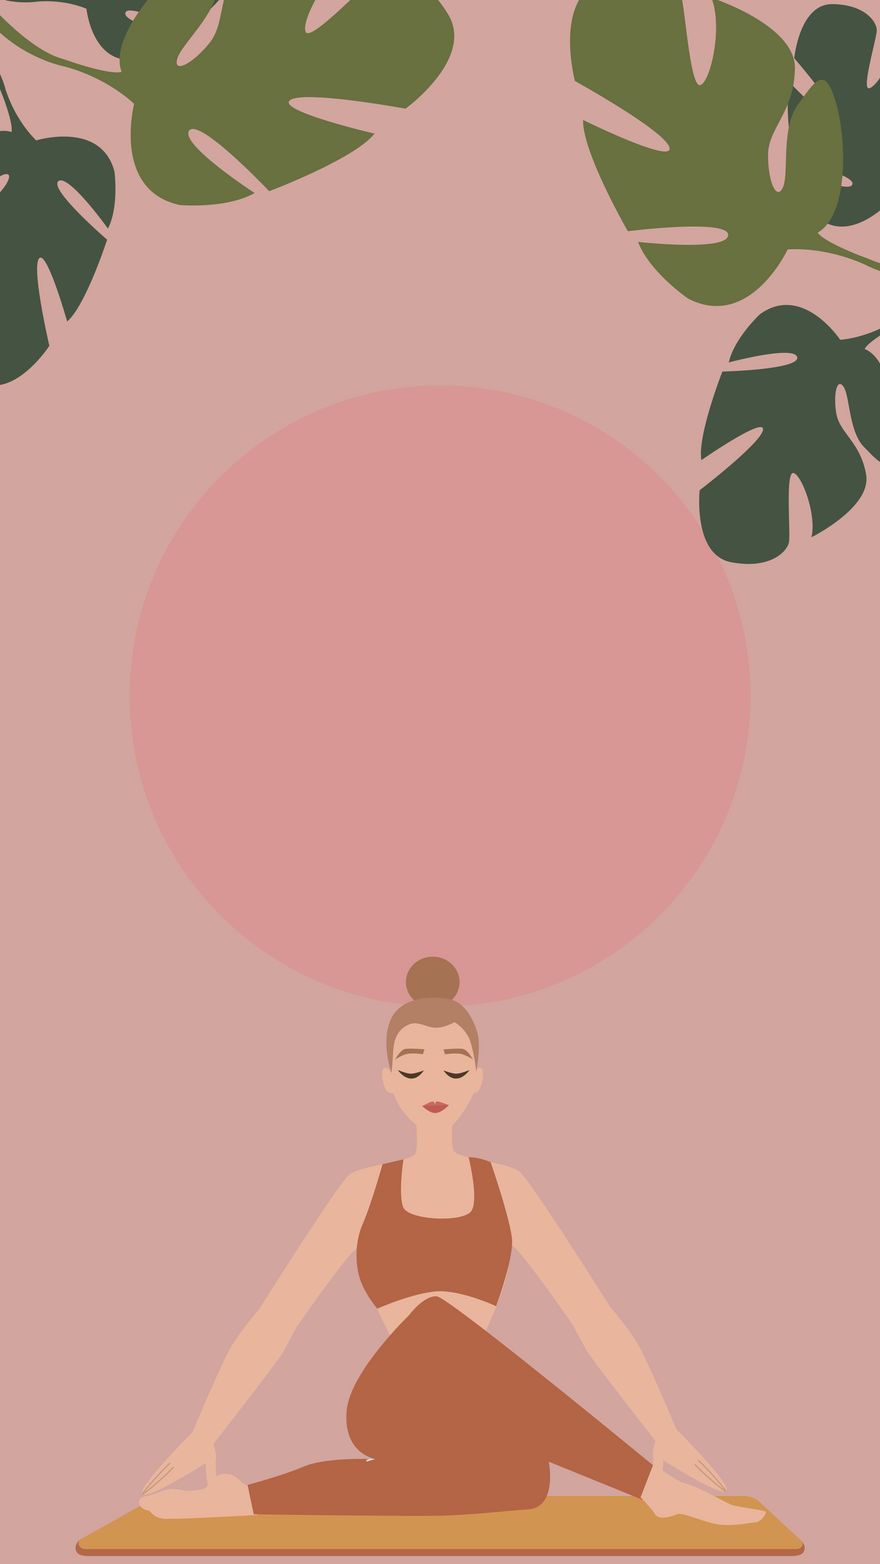 https://images.template.net/125316/international-yoga-day-iphone-background-ktos7.png